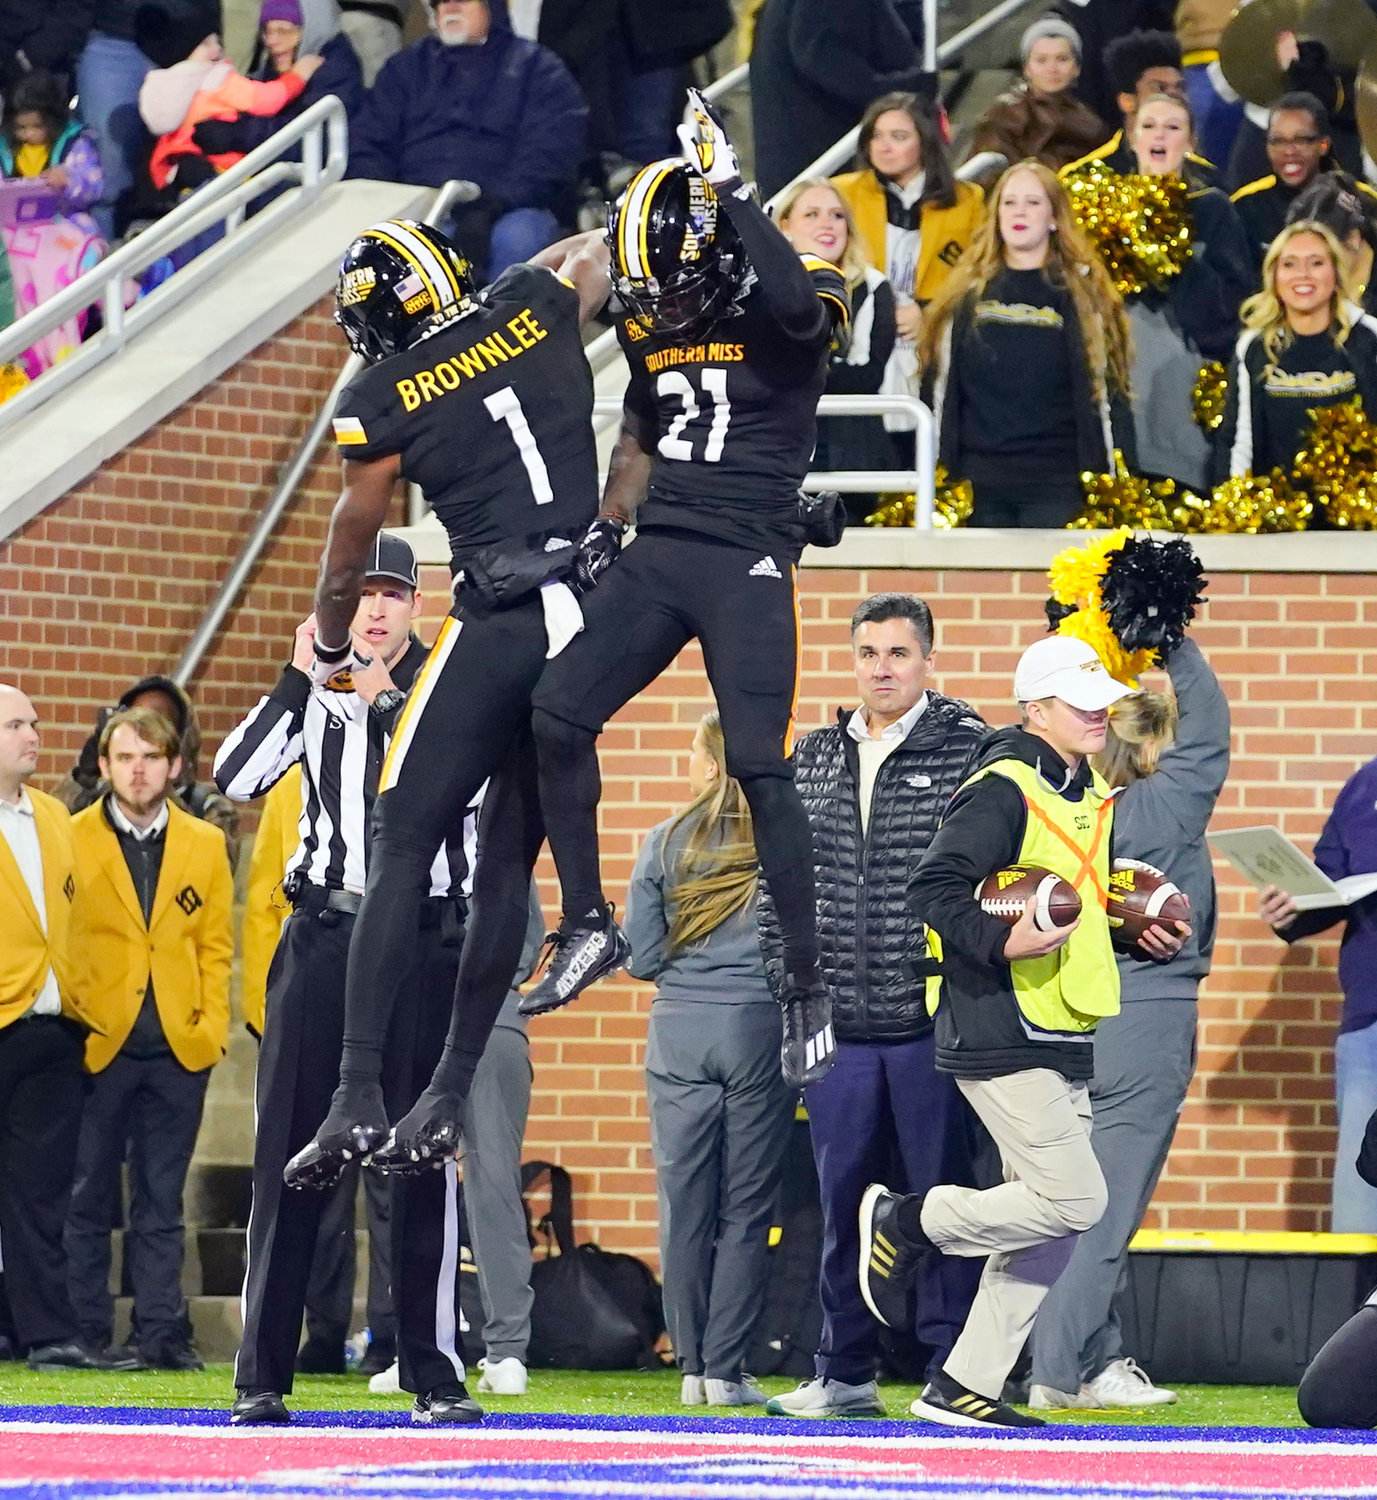 Golden Eagle freshman Tiaquelin Mims (21) celebrates his receiving touchdown with senior Jason Brownlee (1) in the third quarter of the Lending Tree Bowl against the Rice Owls at Hancock Whitney Stadium Saturday, Dec. 17, in Mobile. Mims’ score helped Southern Miss earn a 38-24 victory to finish 7-6 overall on the season.